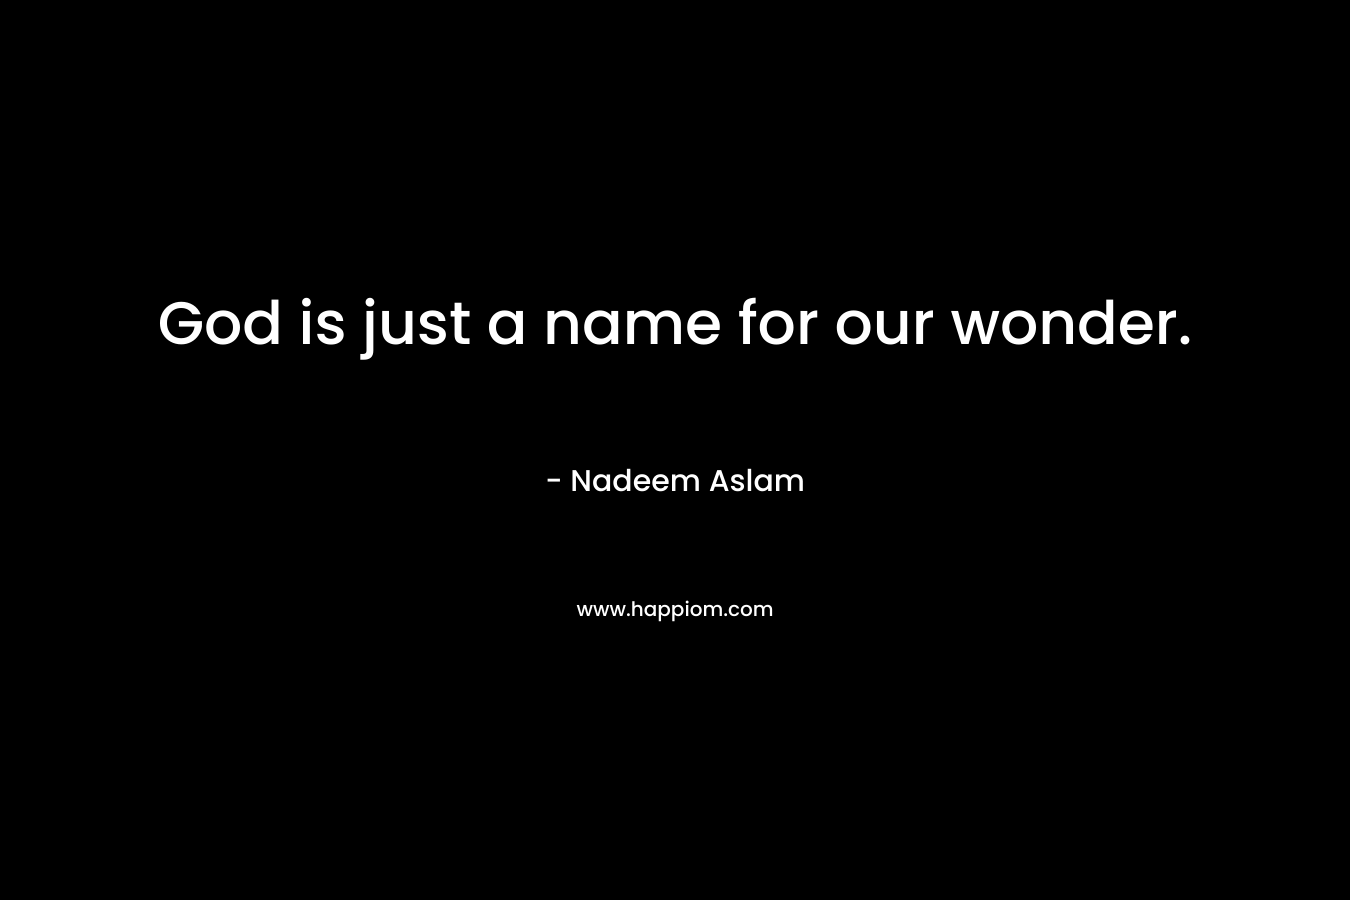 God is just a name for our wonder.